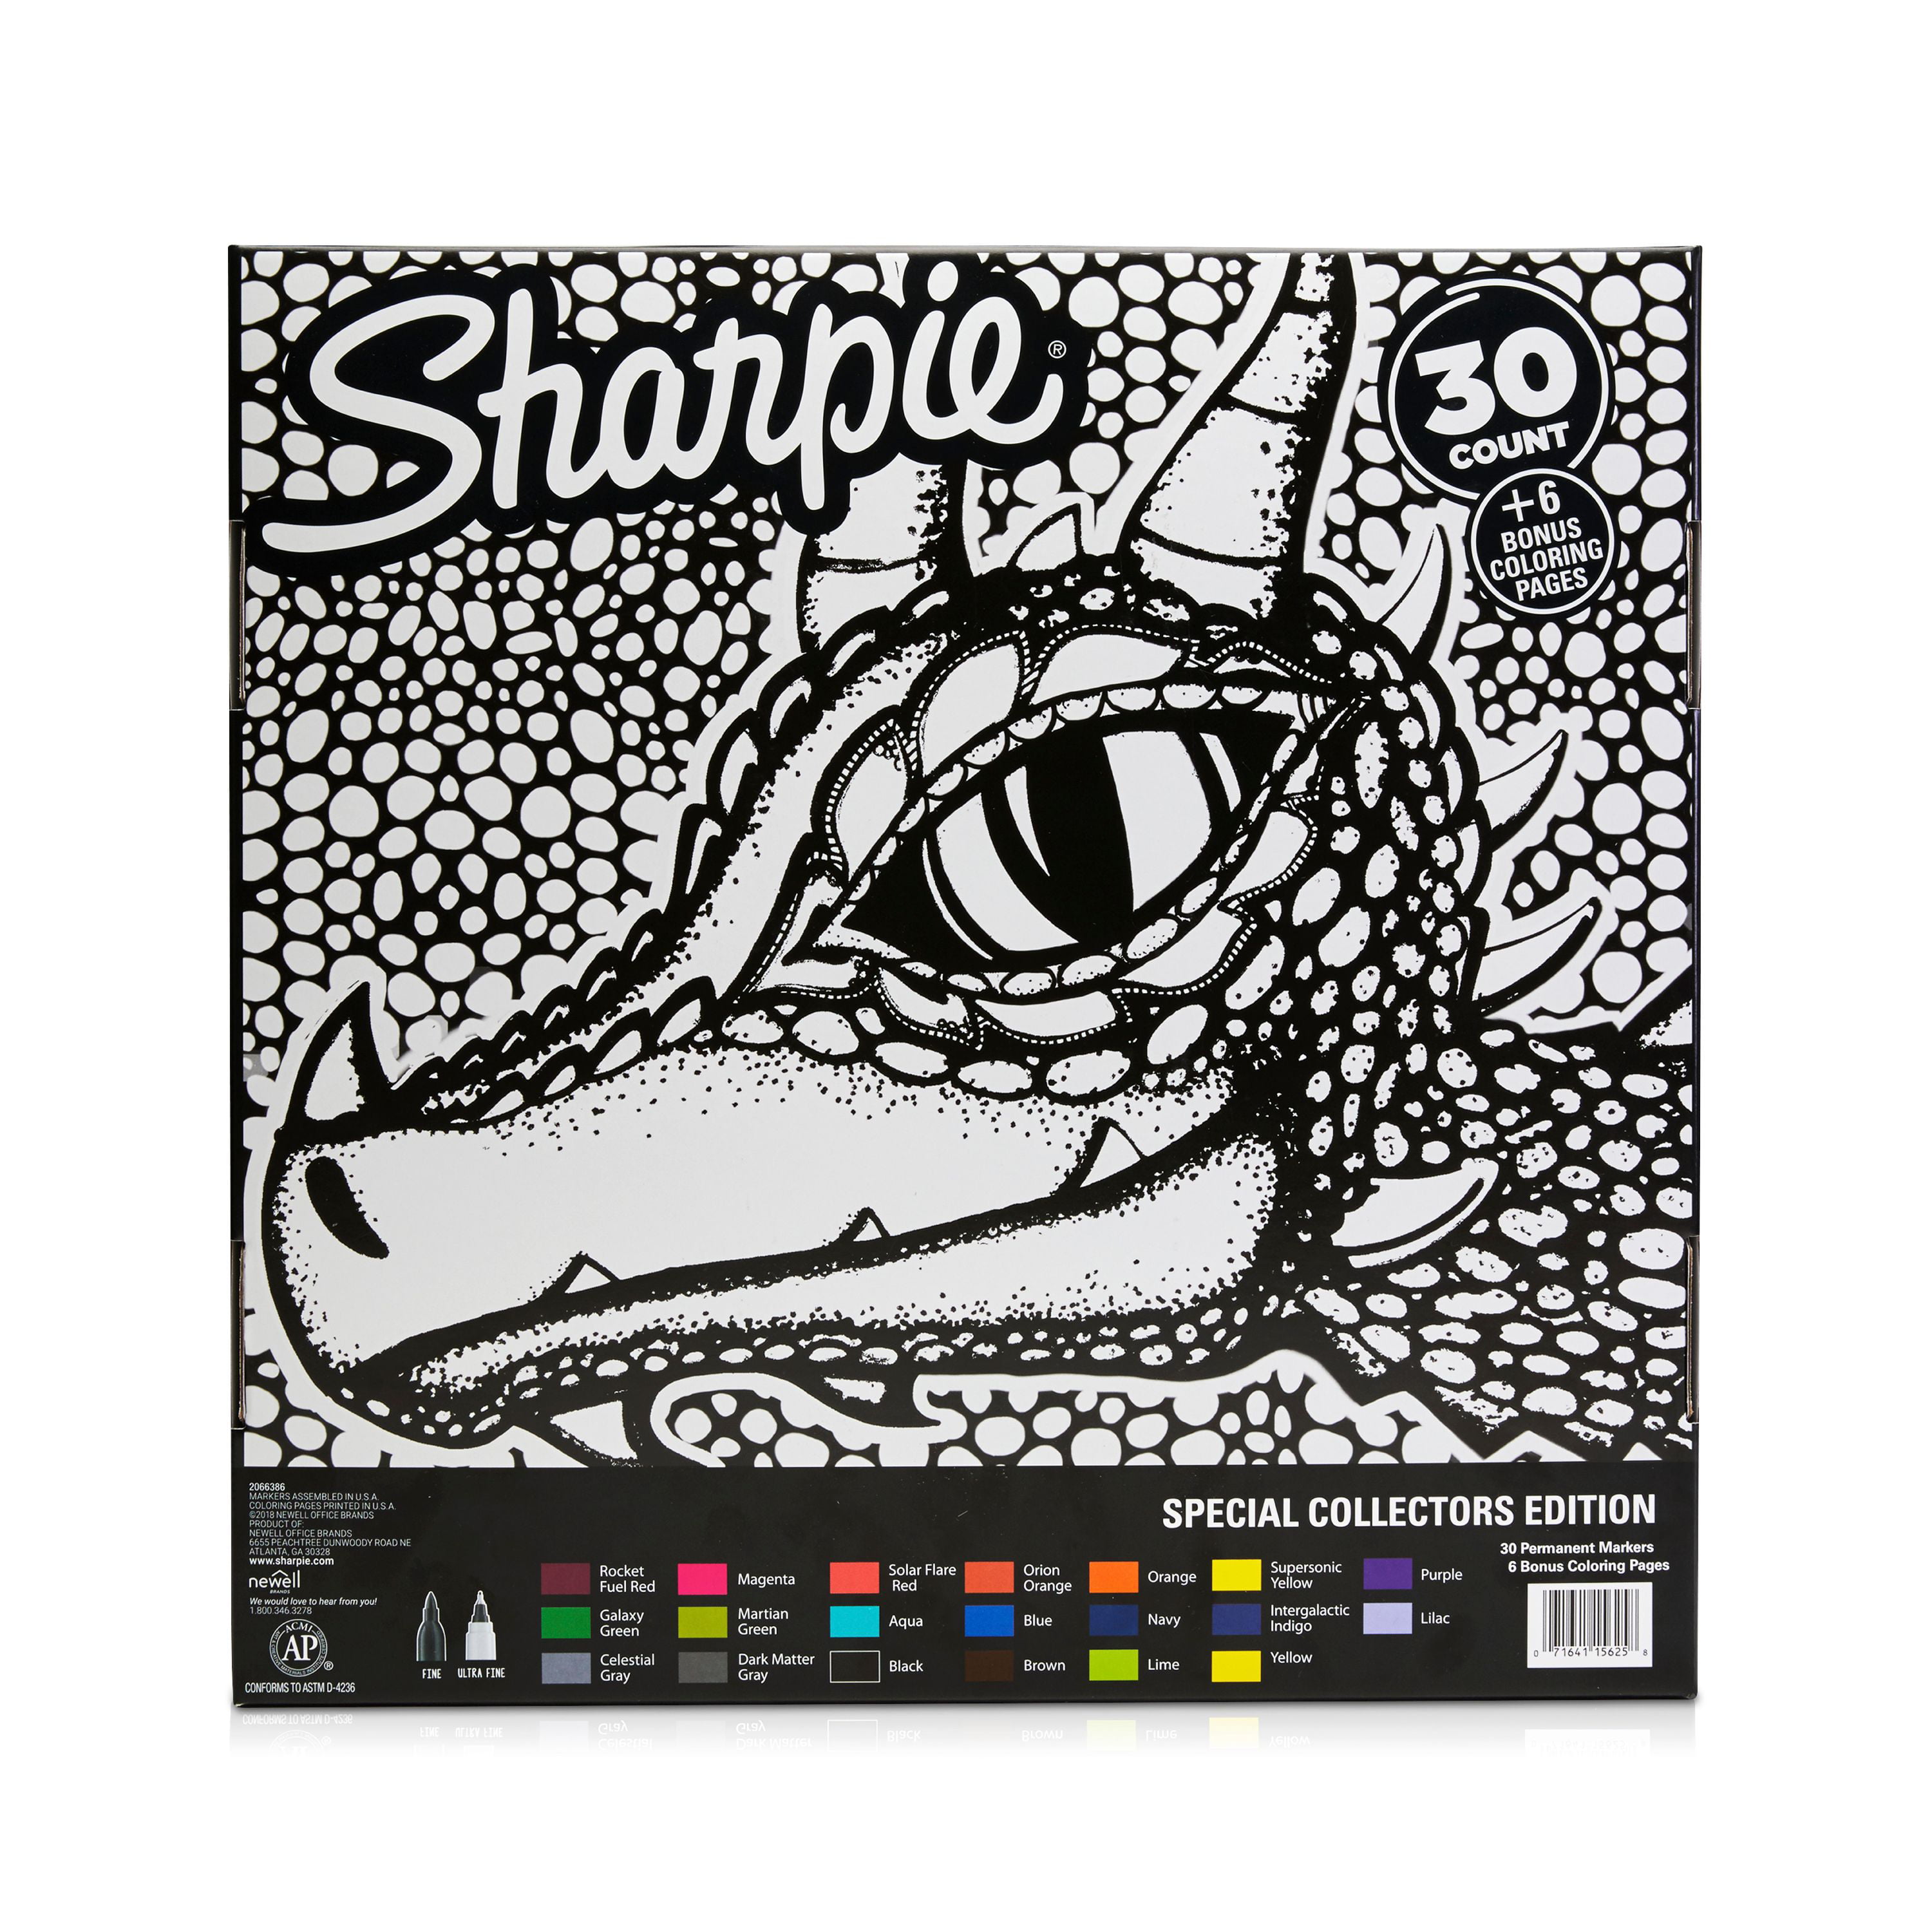 2 Sharpie Limited Edition 30 Count Permanent Markers & 6 Assorted Coloring Pages for sale online 